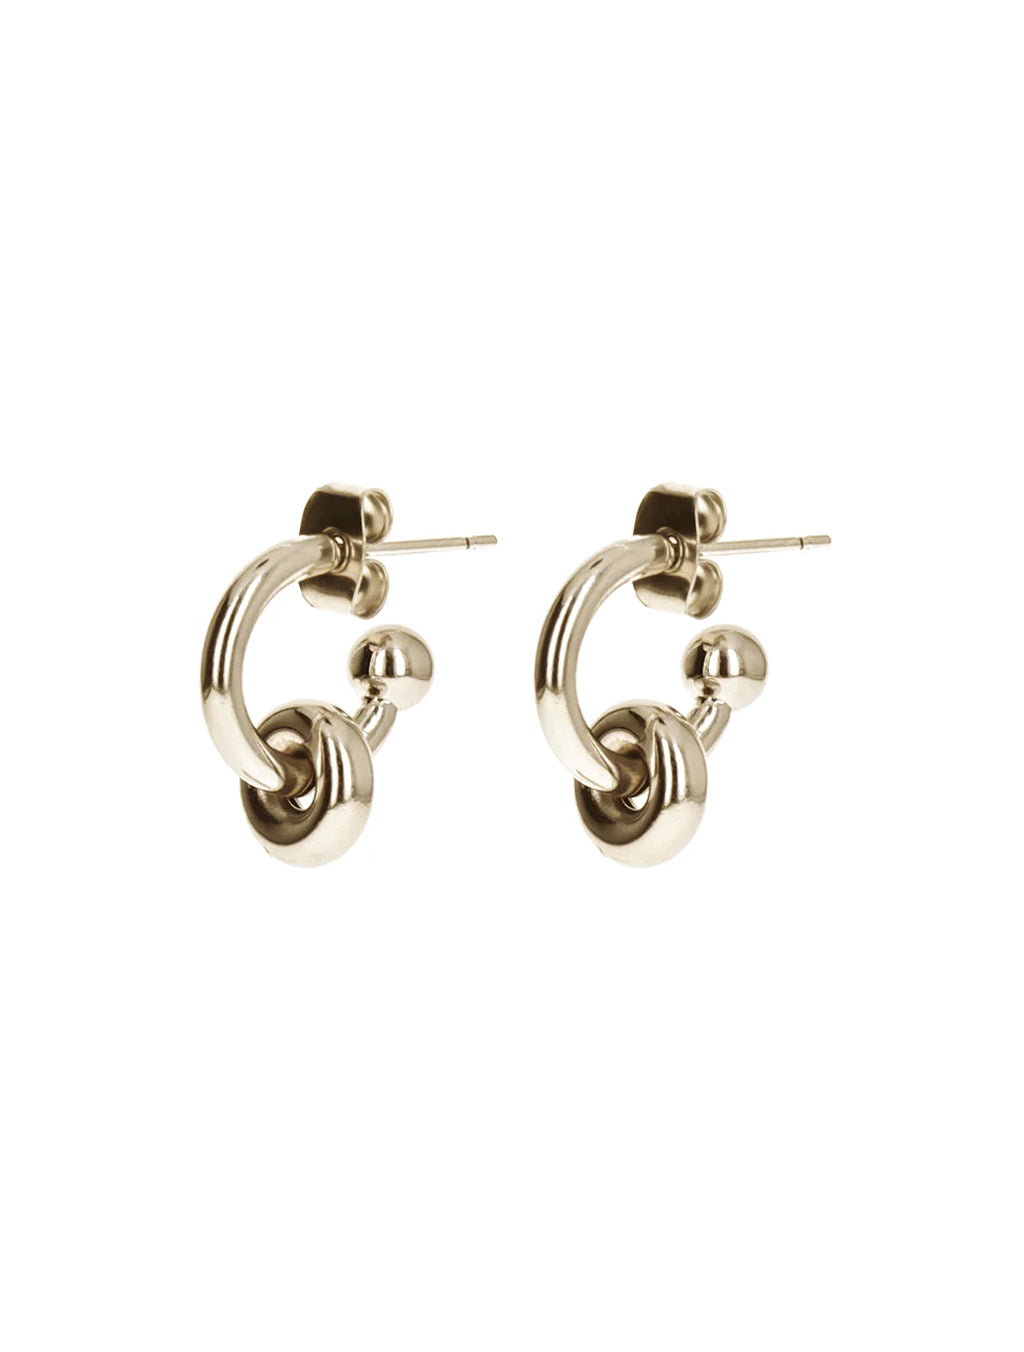 Justine Clenquet Ethan Gold Earrings